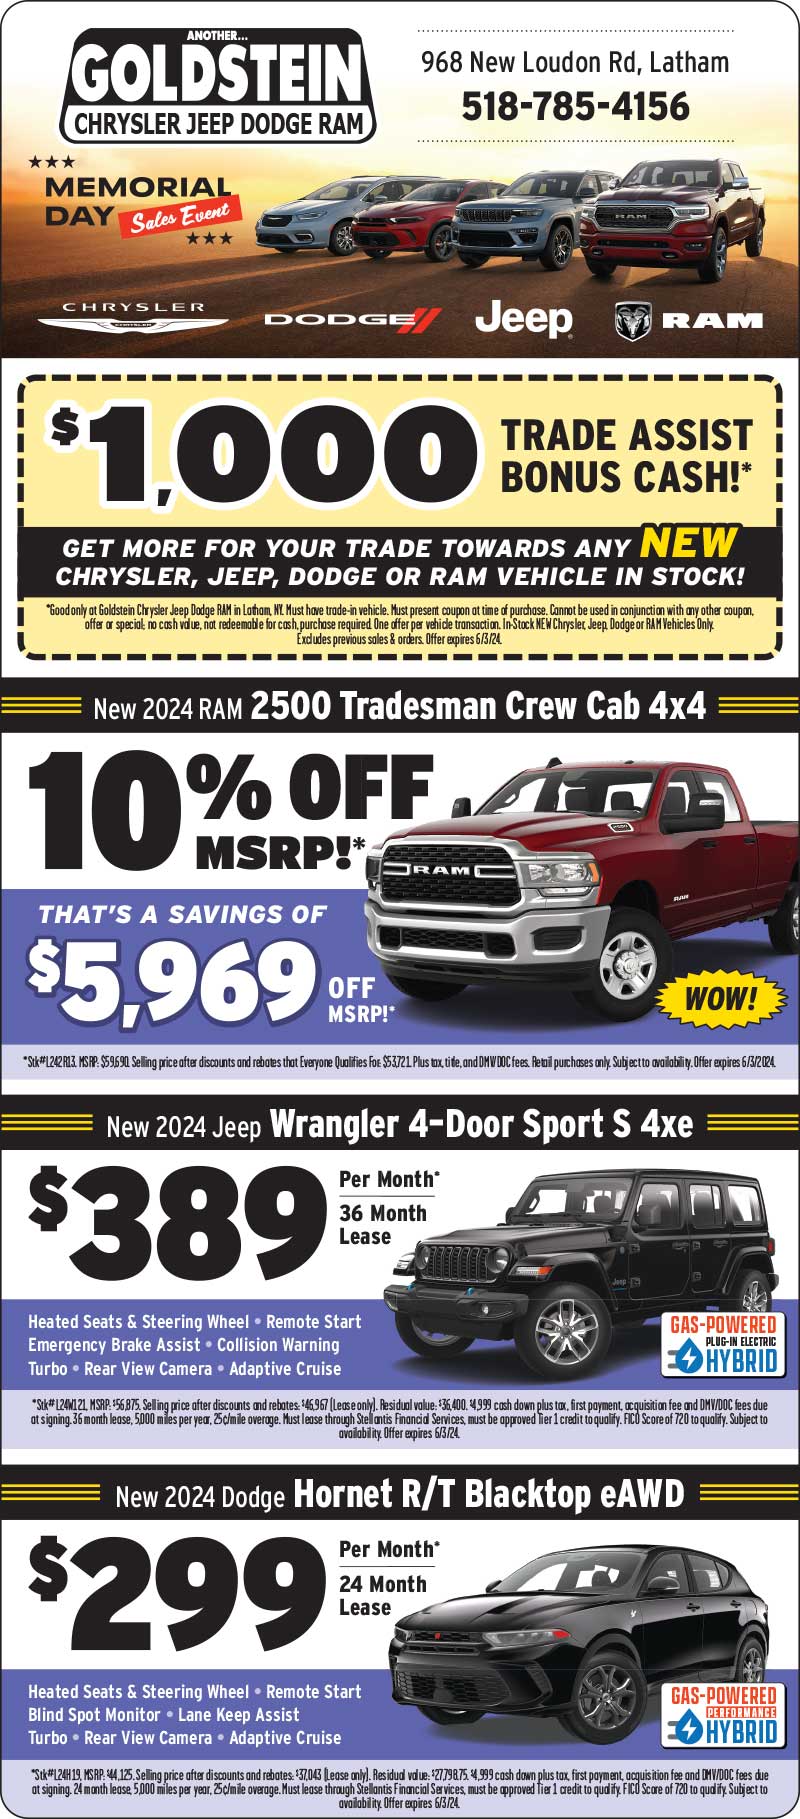 Goldstein Chrysler Jeep Dodge RAM of Albany, NY Newspaper Specials